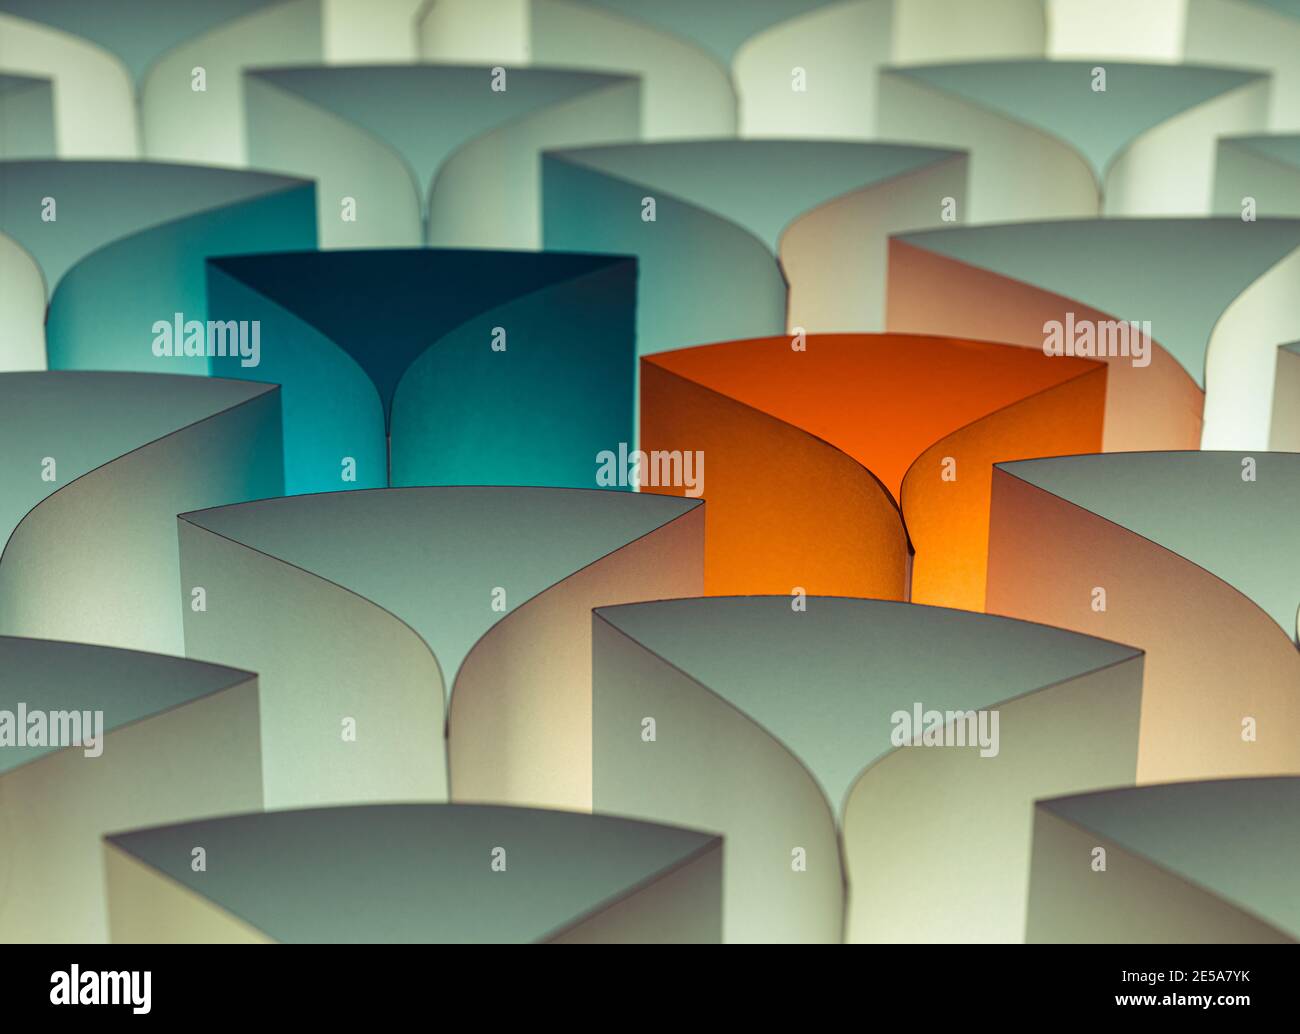 Different glowing shapes made of paper. Creative concept. Stock Photo